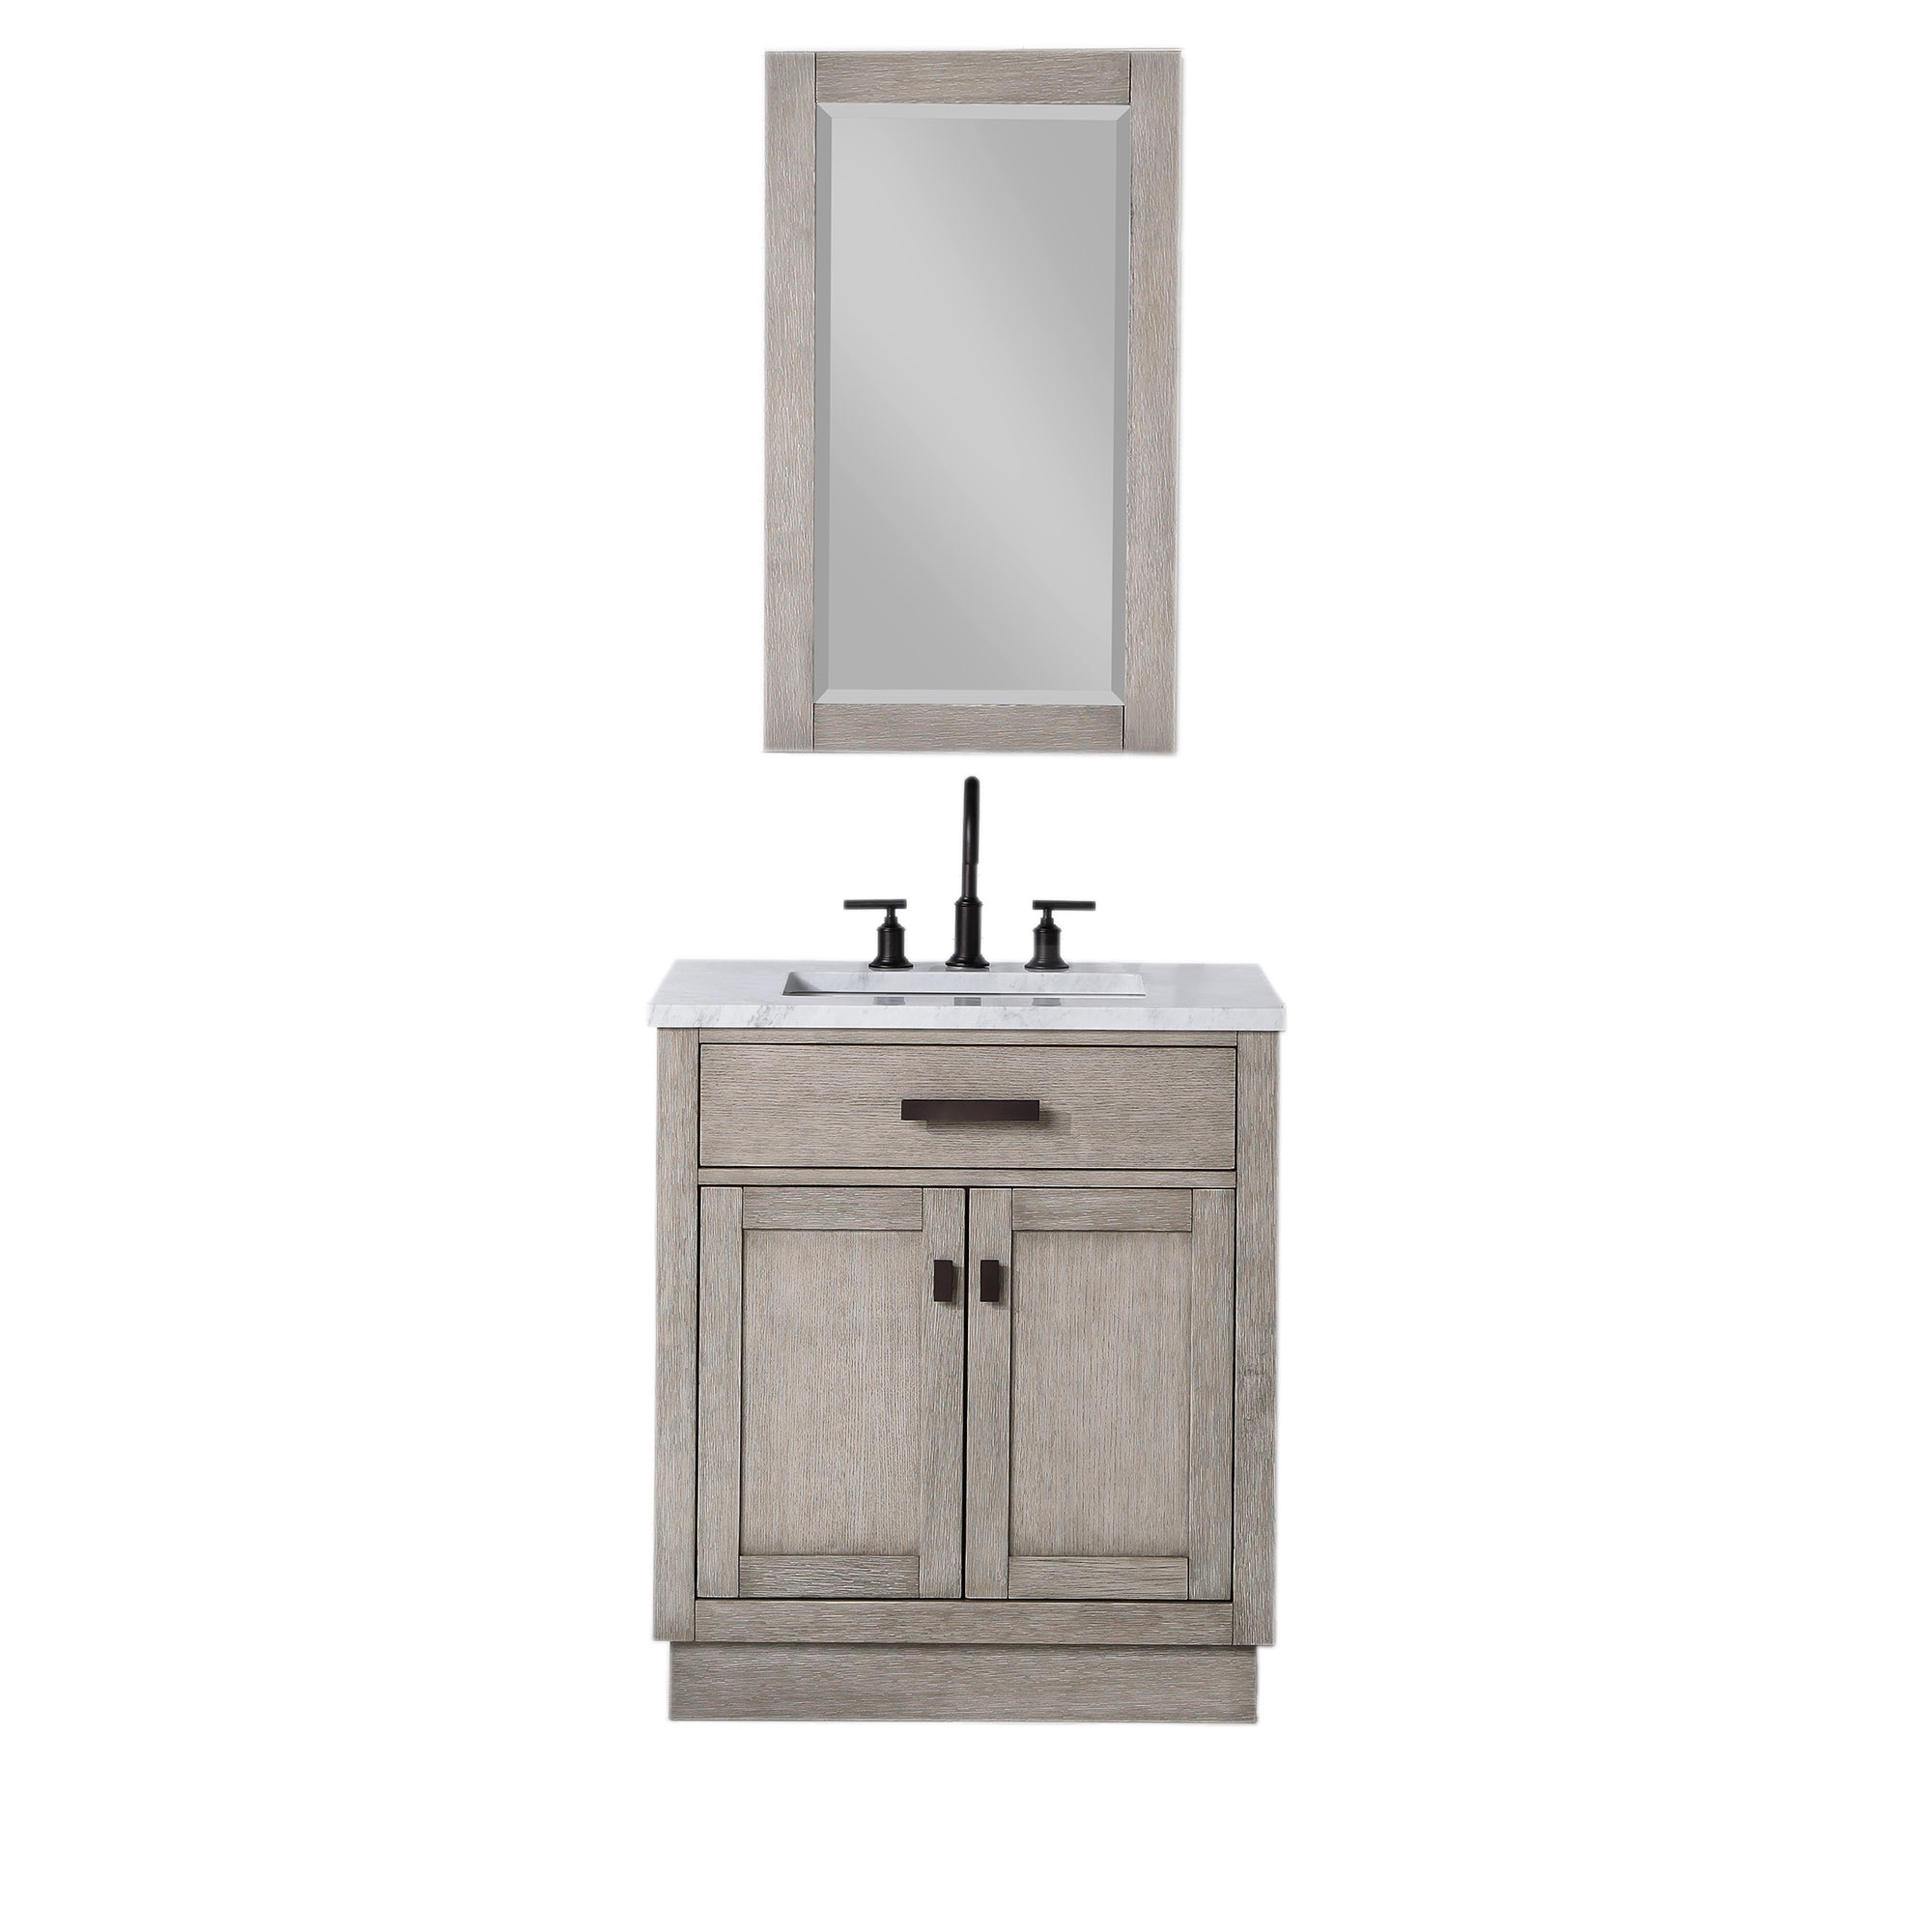 Water Creation | Chestnut 30 In. Single Sink Carrara White Marble Countertop Vanity In Grey Oak with Grooseneck Faucet and Mirror | CH30CW03GK-R21BL1403